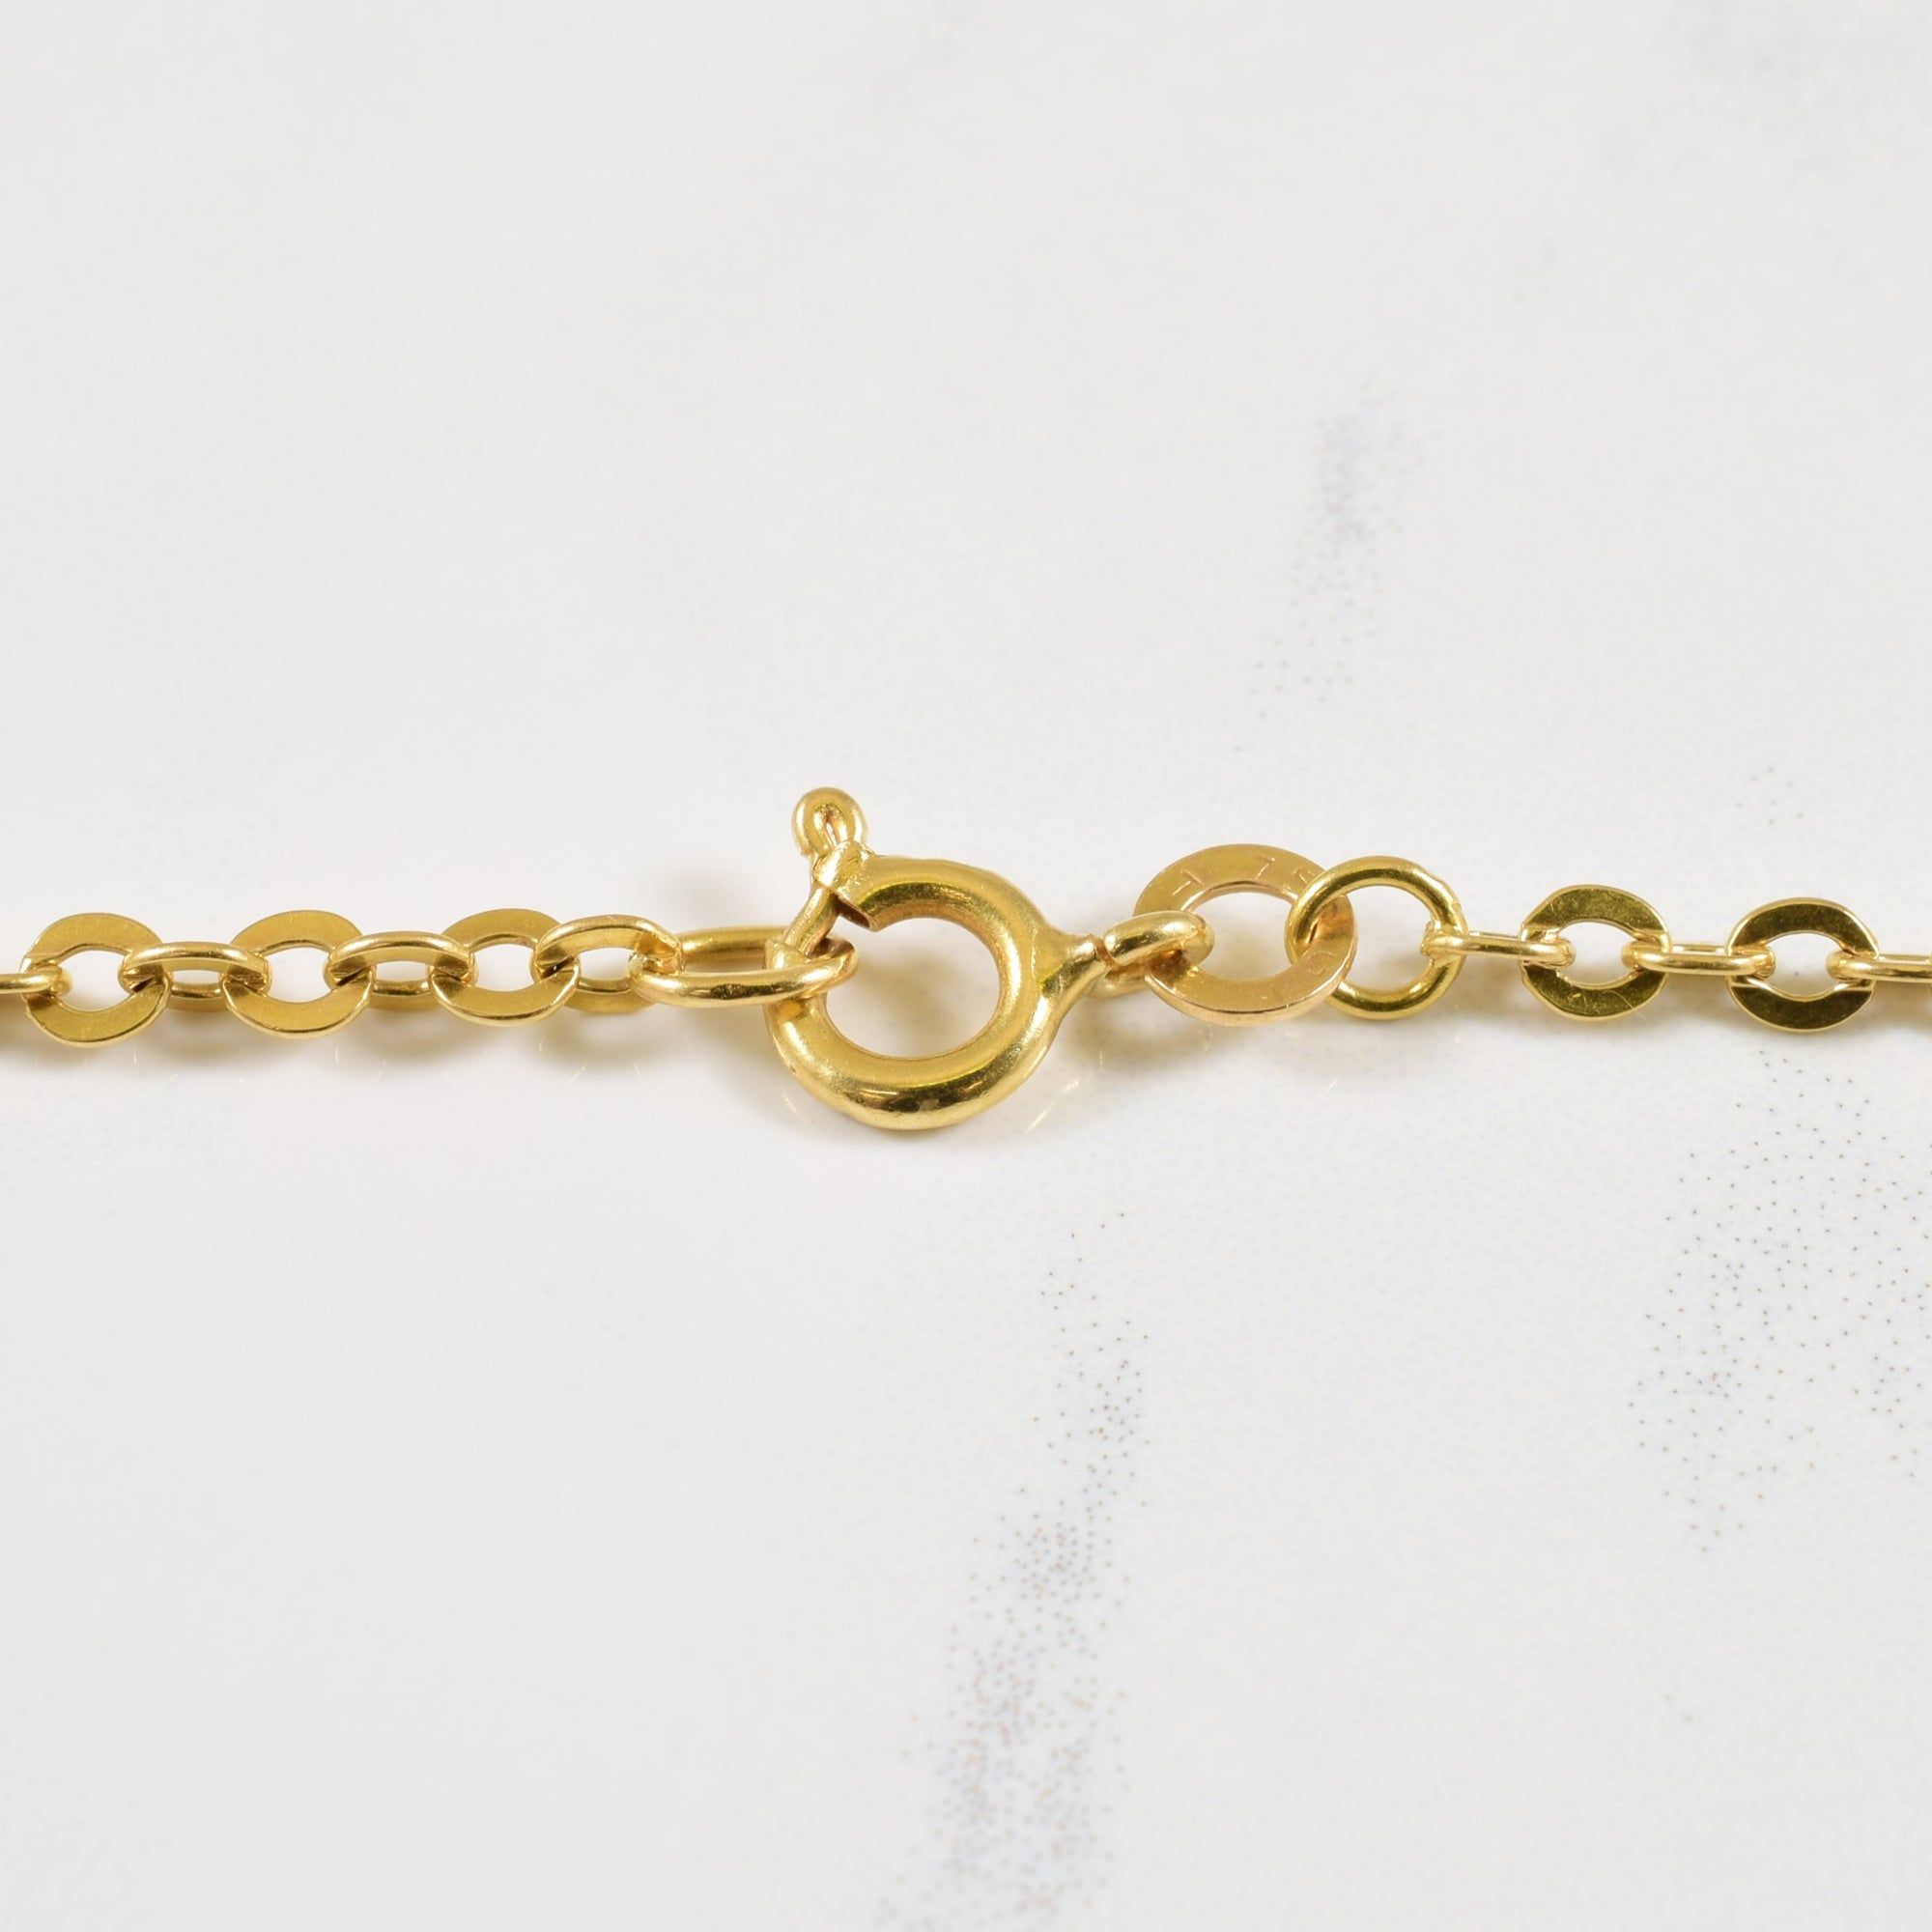 18k Yellow Gold Curb Chain | 24